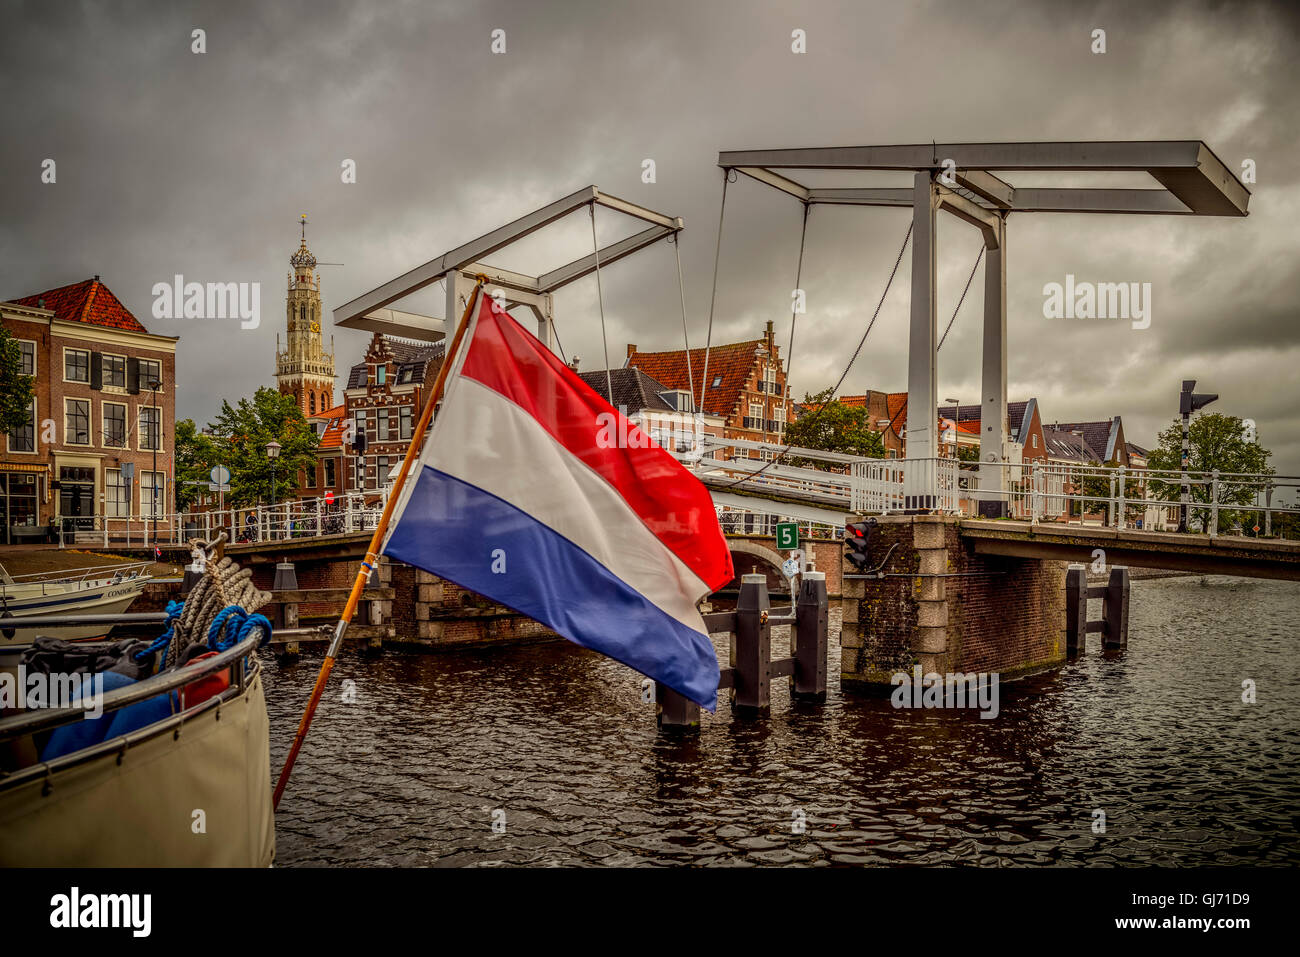 The Netherlands, Haarlem, canal, flag Stock Photo